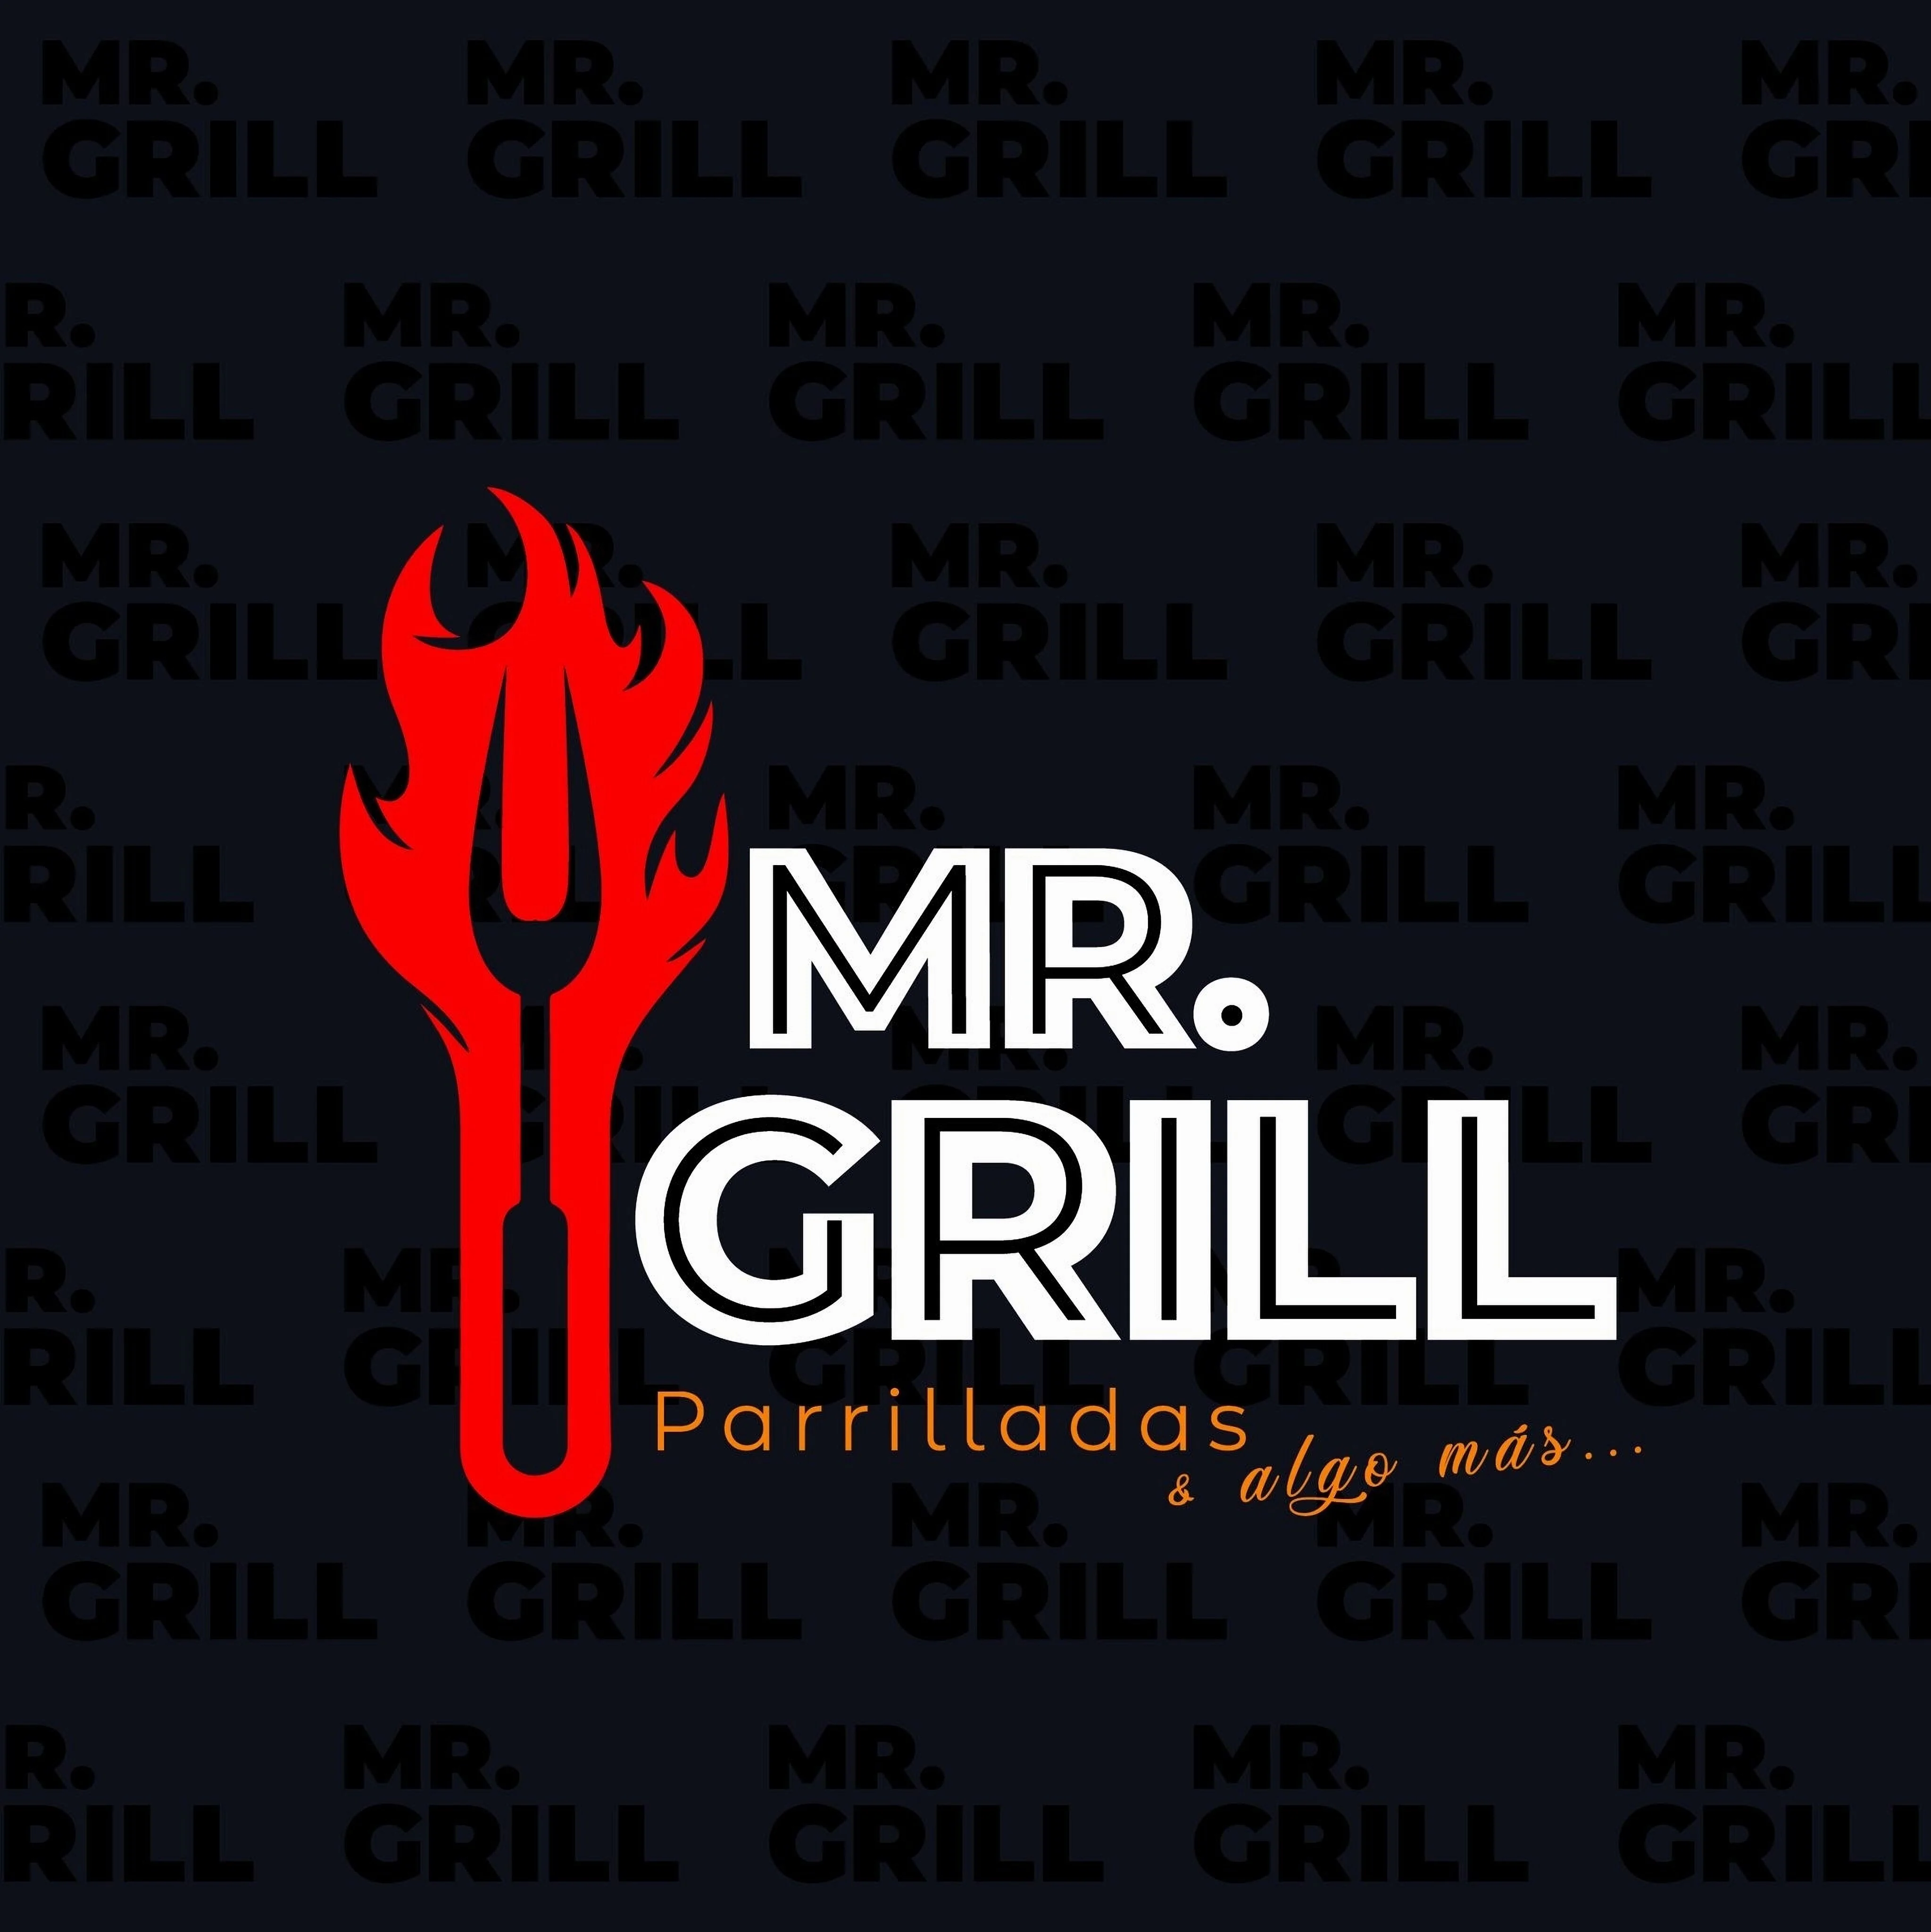 Restaurantes-the-grill-house-19317